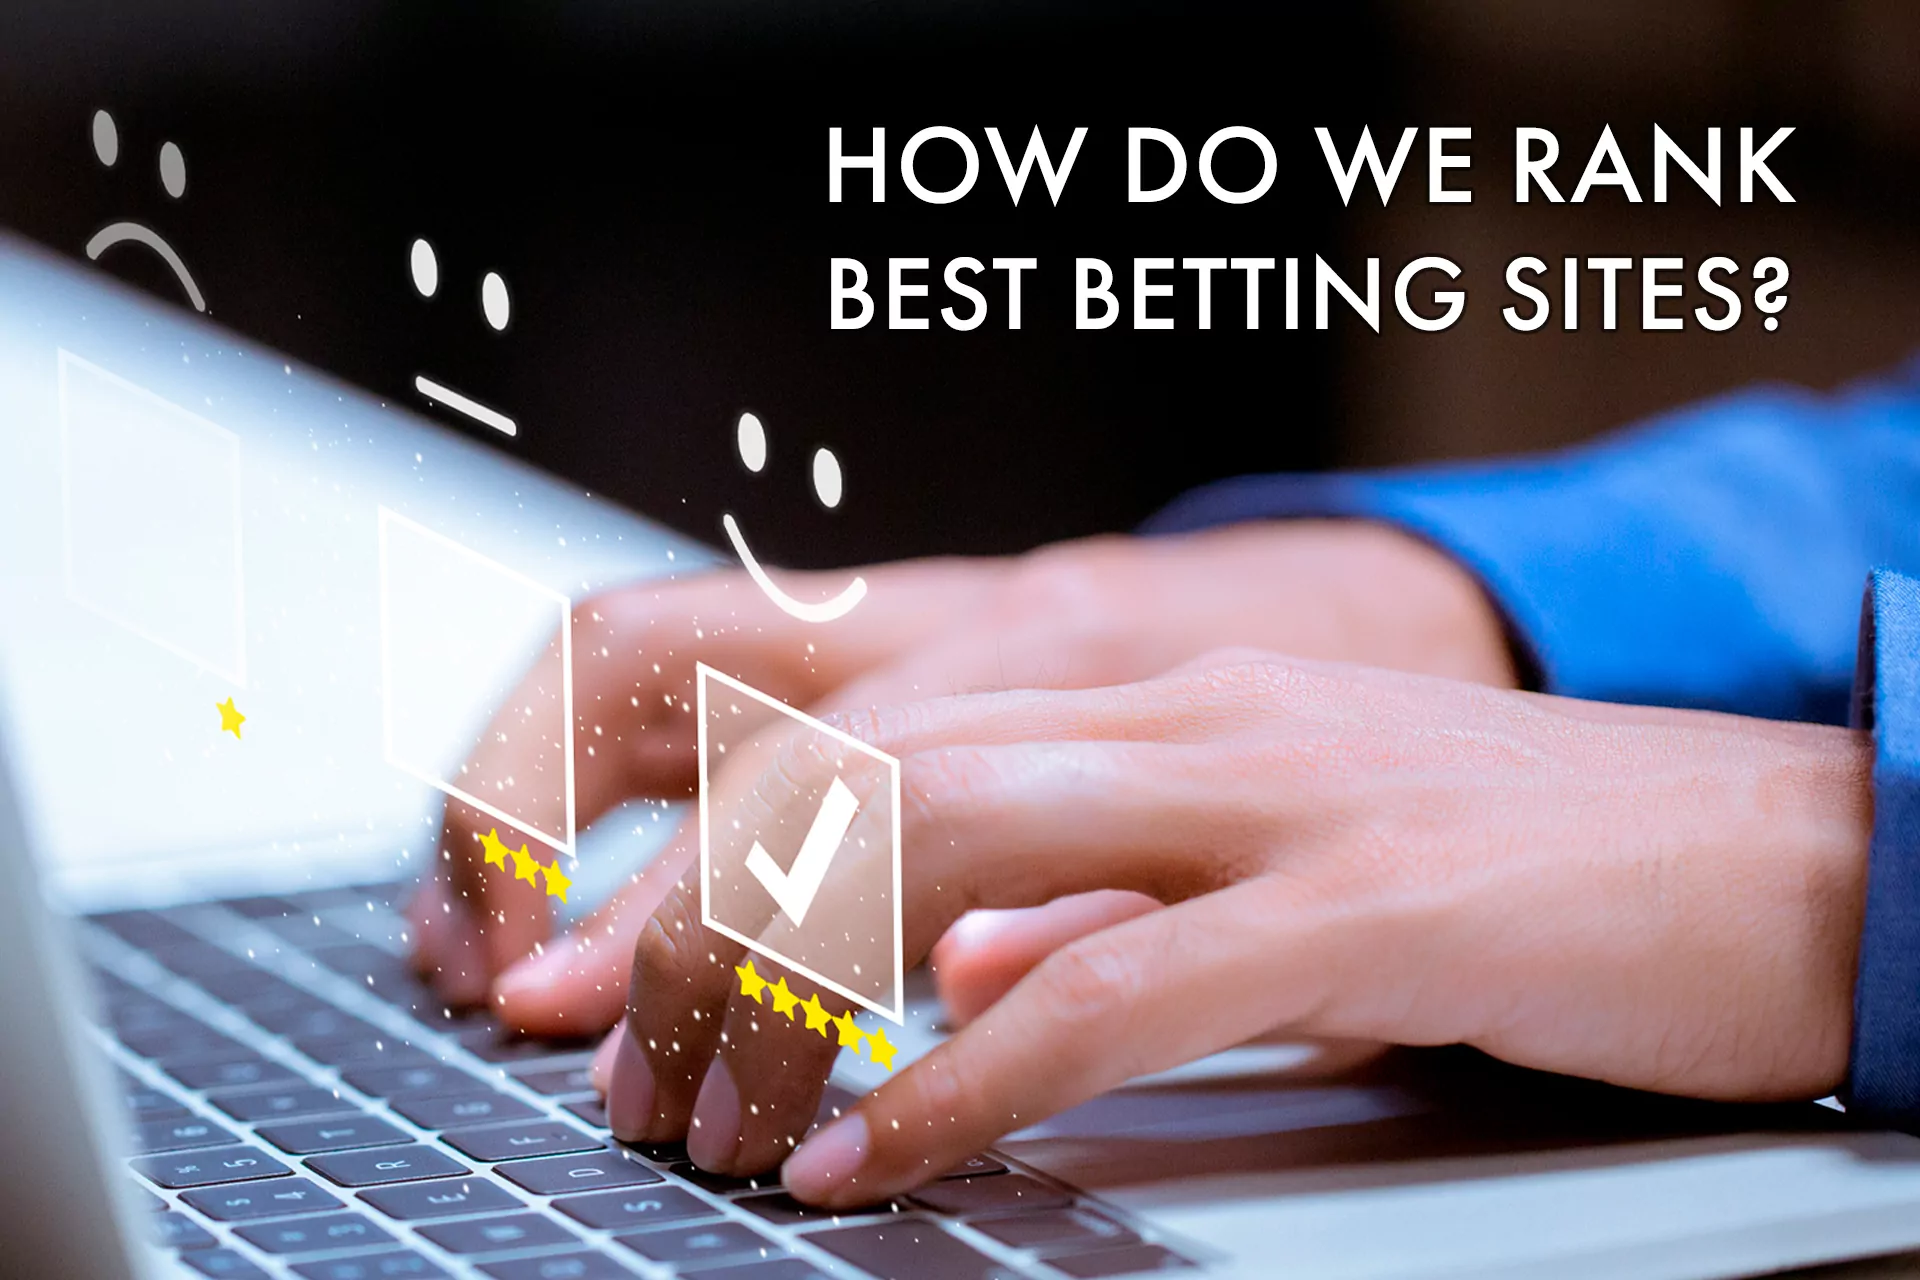 Look at rating of betting sites by Bettingonlinebd and choose the best one according to your goals.